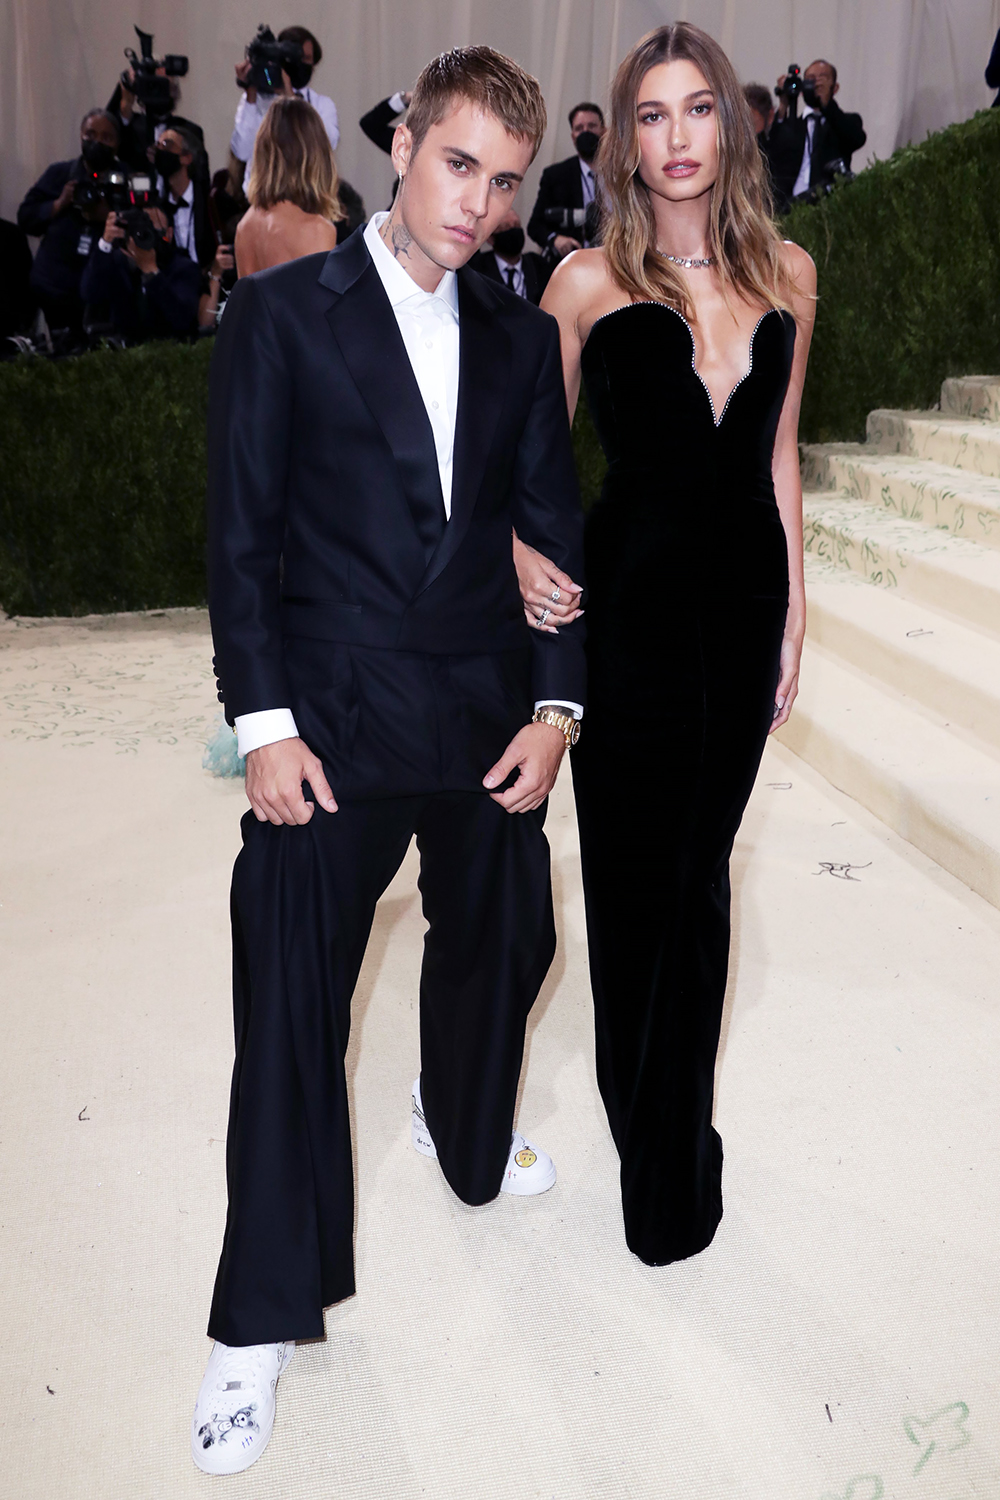 Met Gala 2021 Red Carpet: The Best Couples